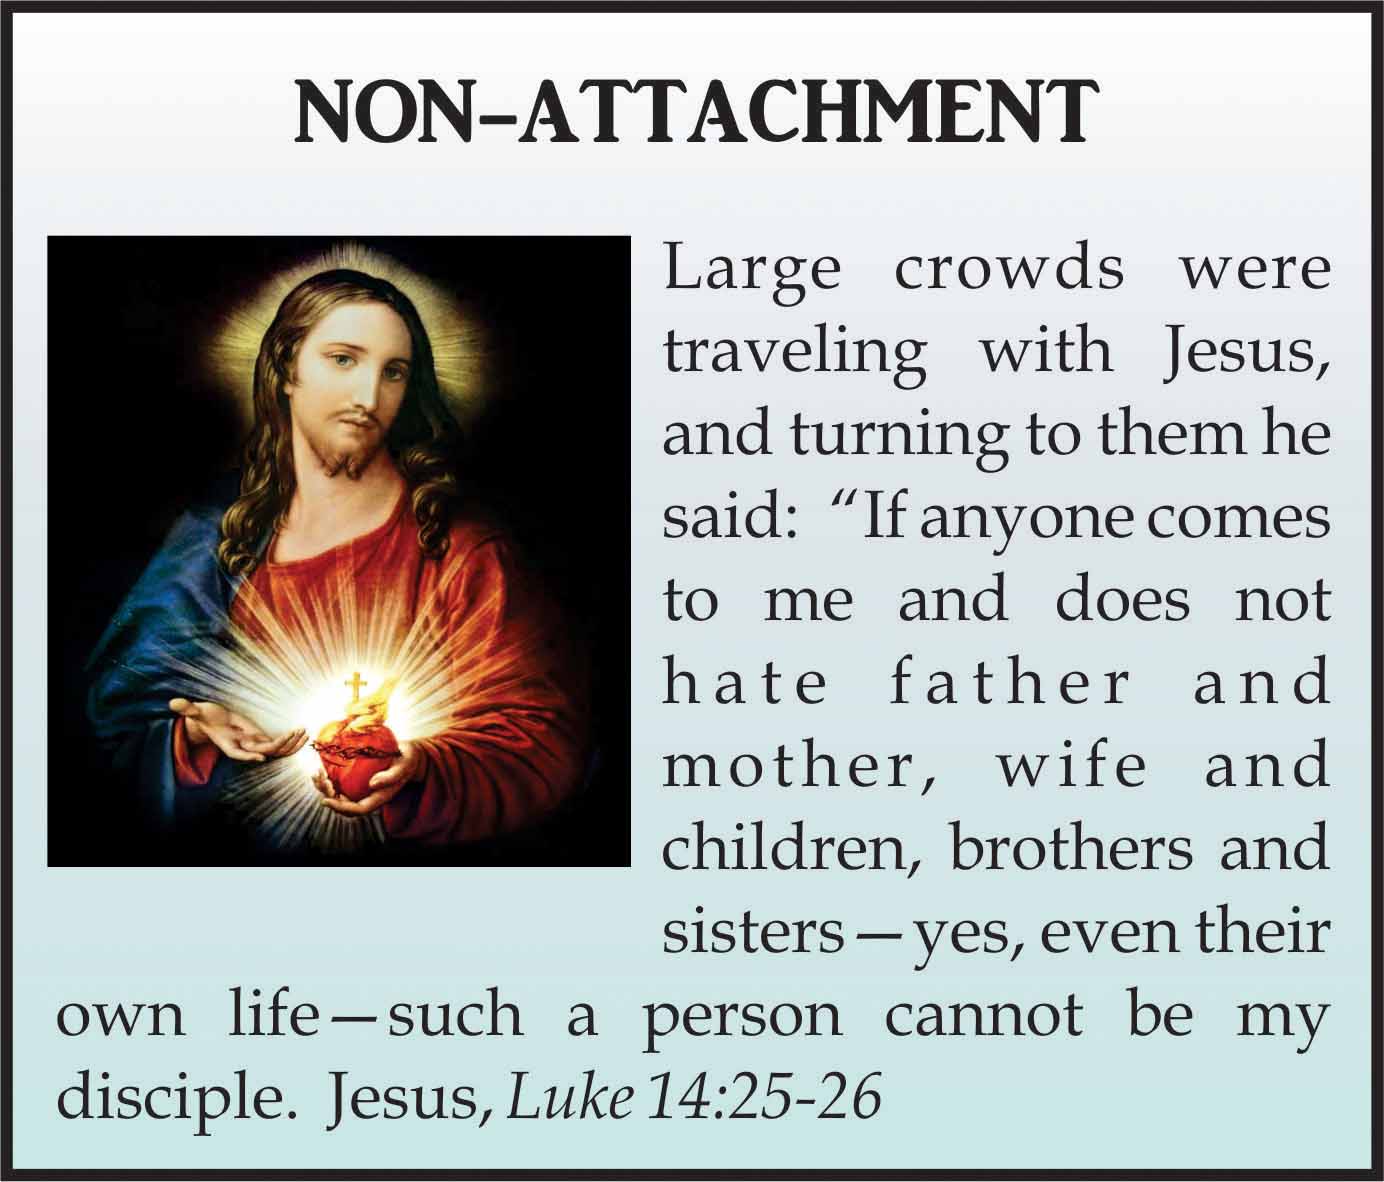 Jesus non-attachment and being happy